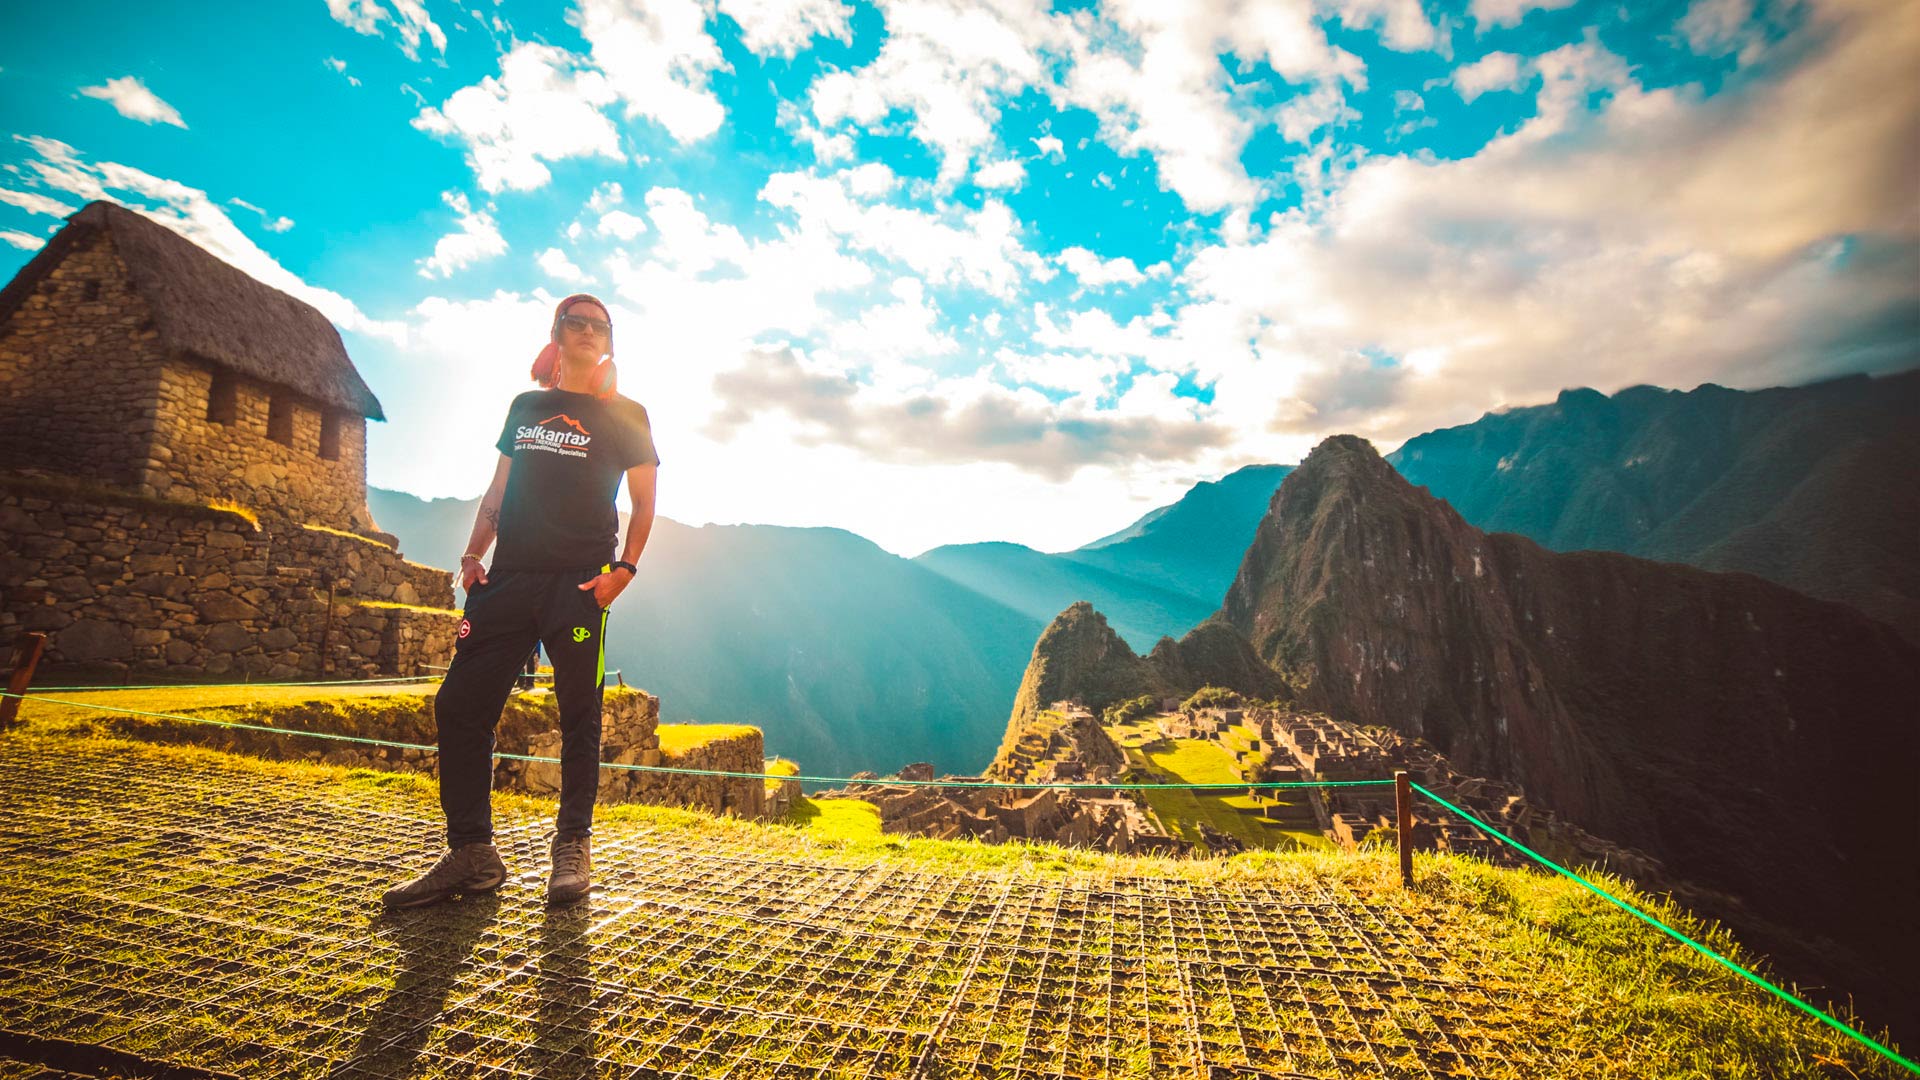 Panoramic view of Machu Picchu with a passenger from the Cusco Expeditions company